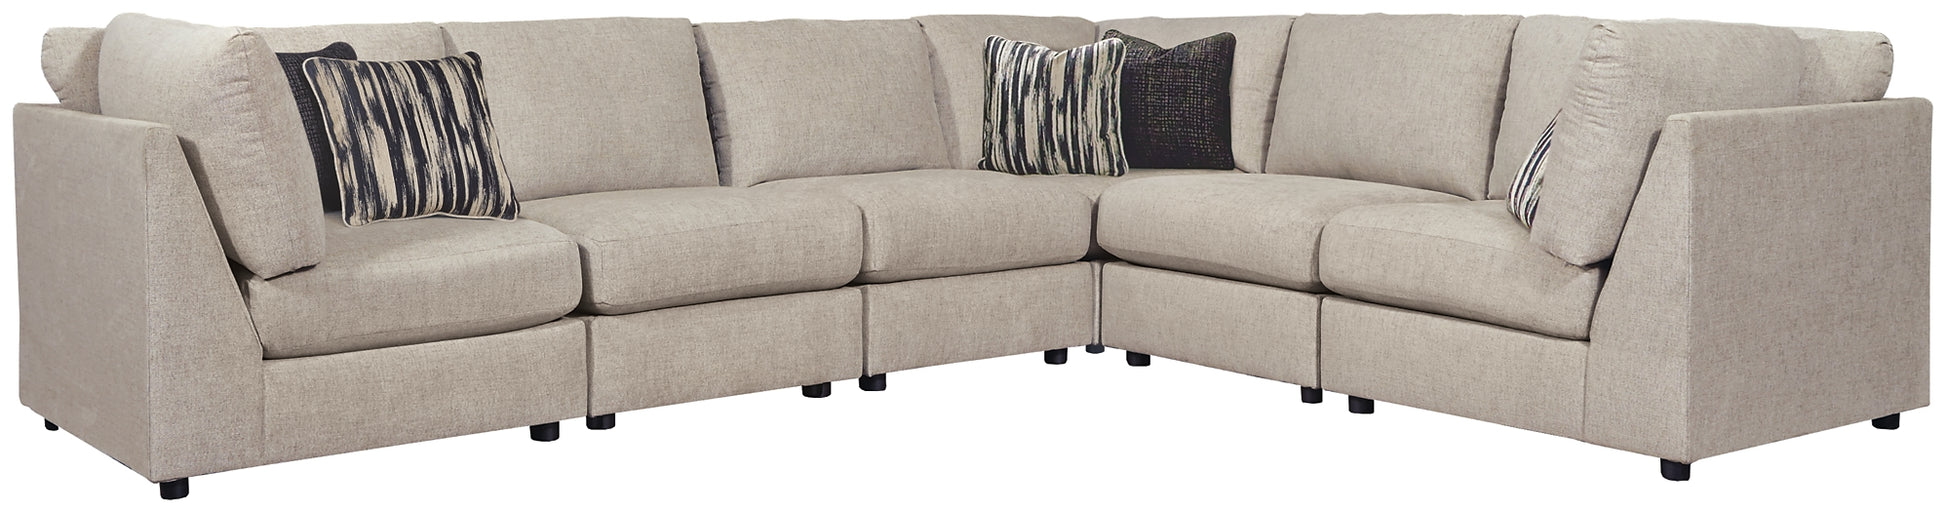 Kellway 6-Piece Sectional JB's Furniture  Home Furniture, Home Decor, Furniture Store